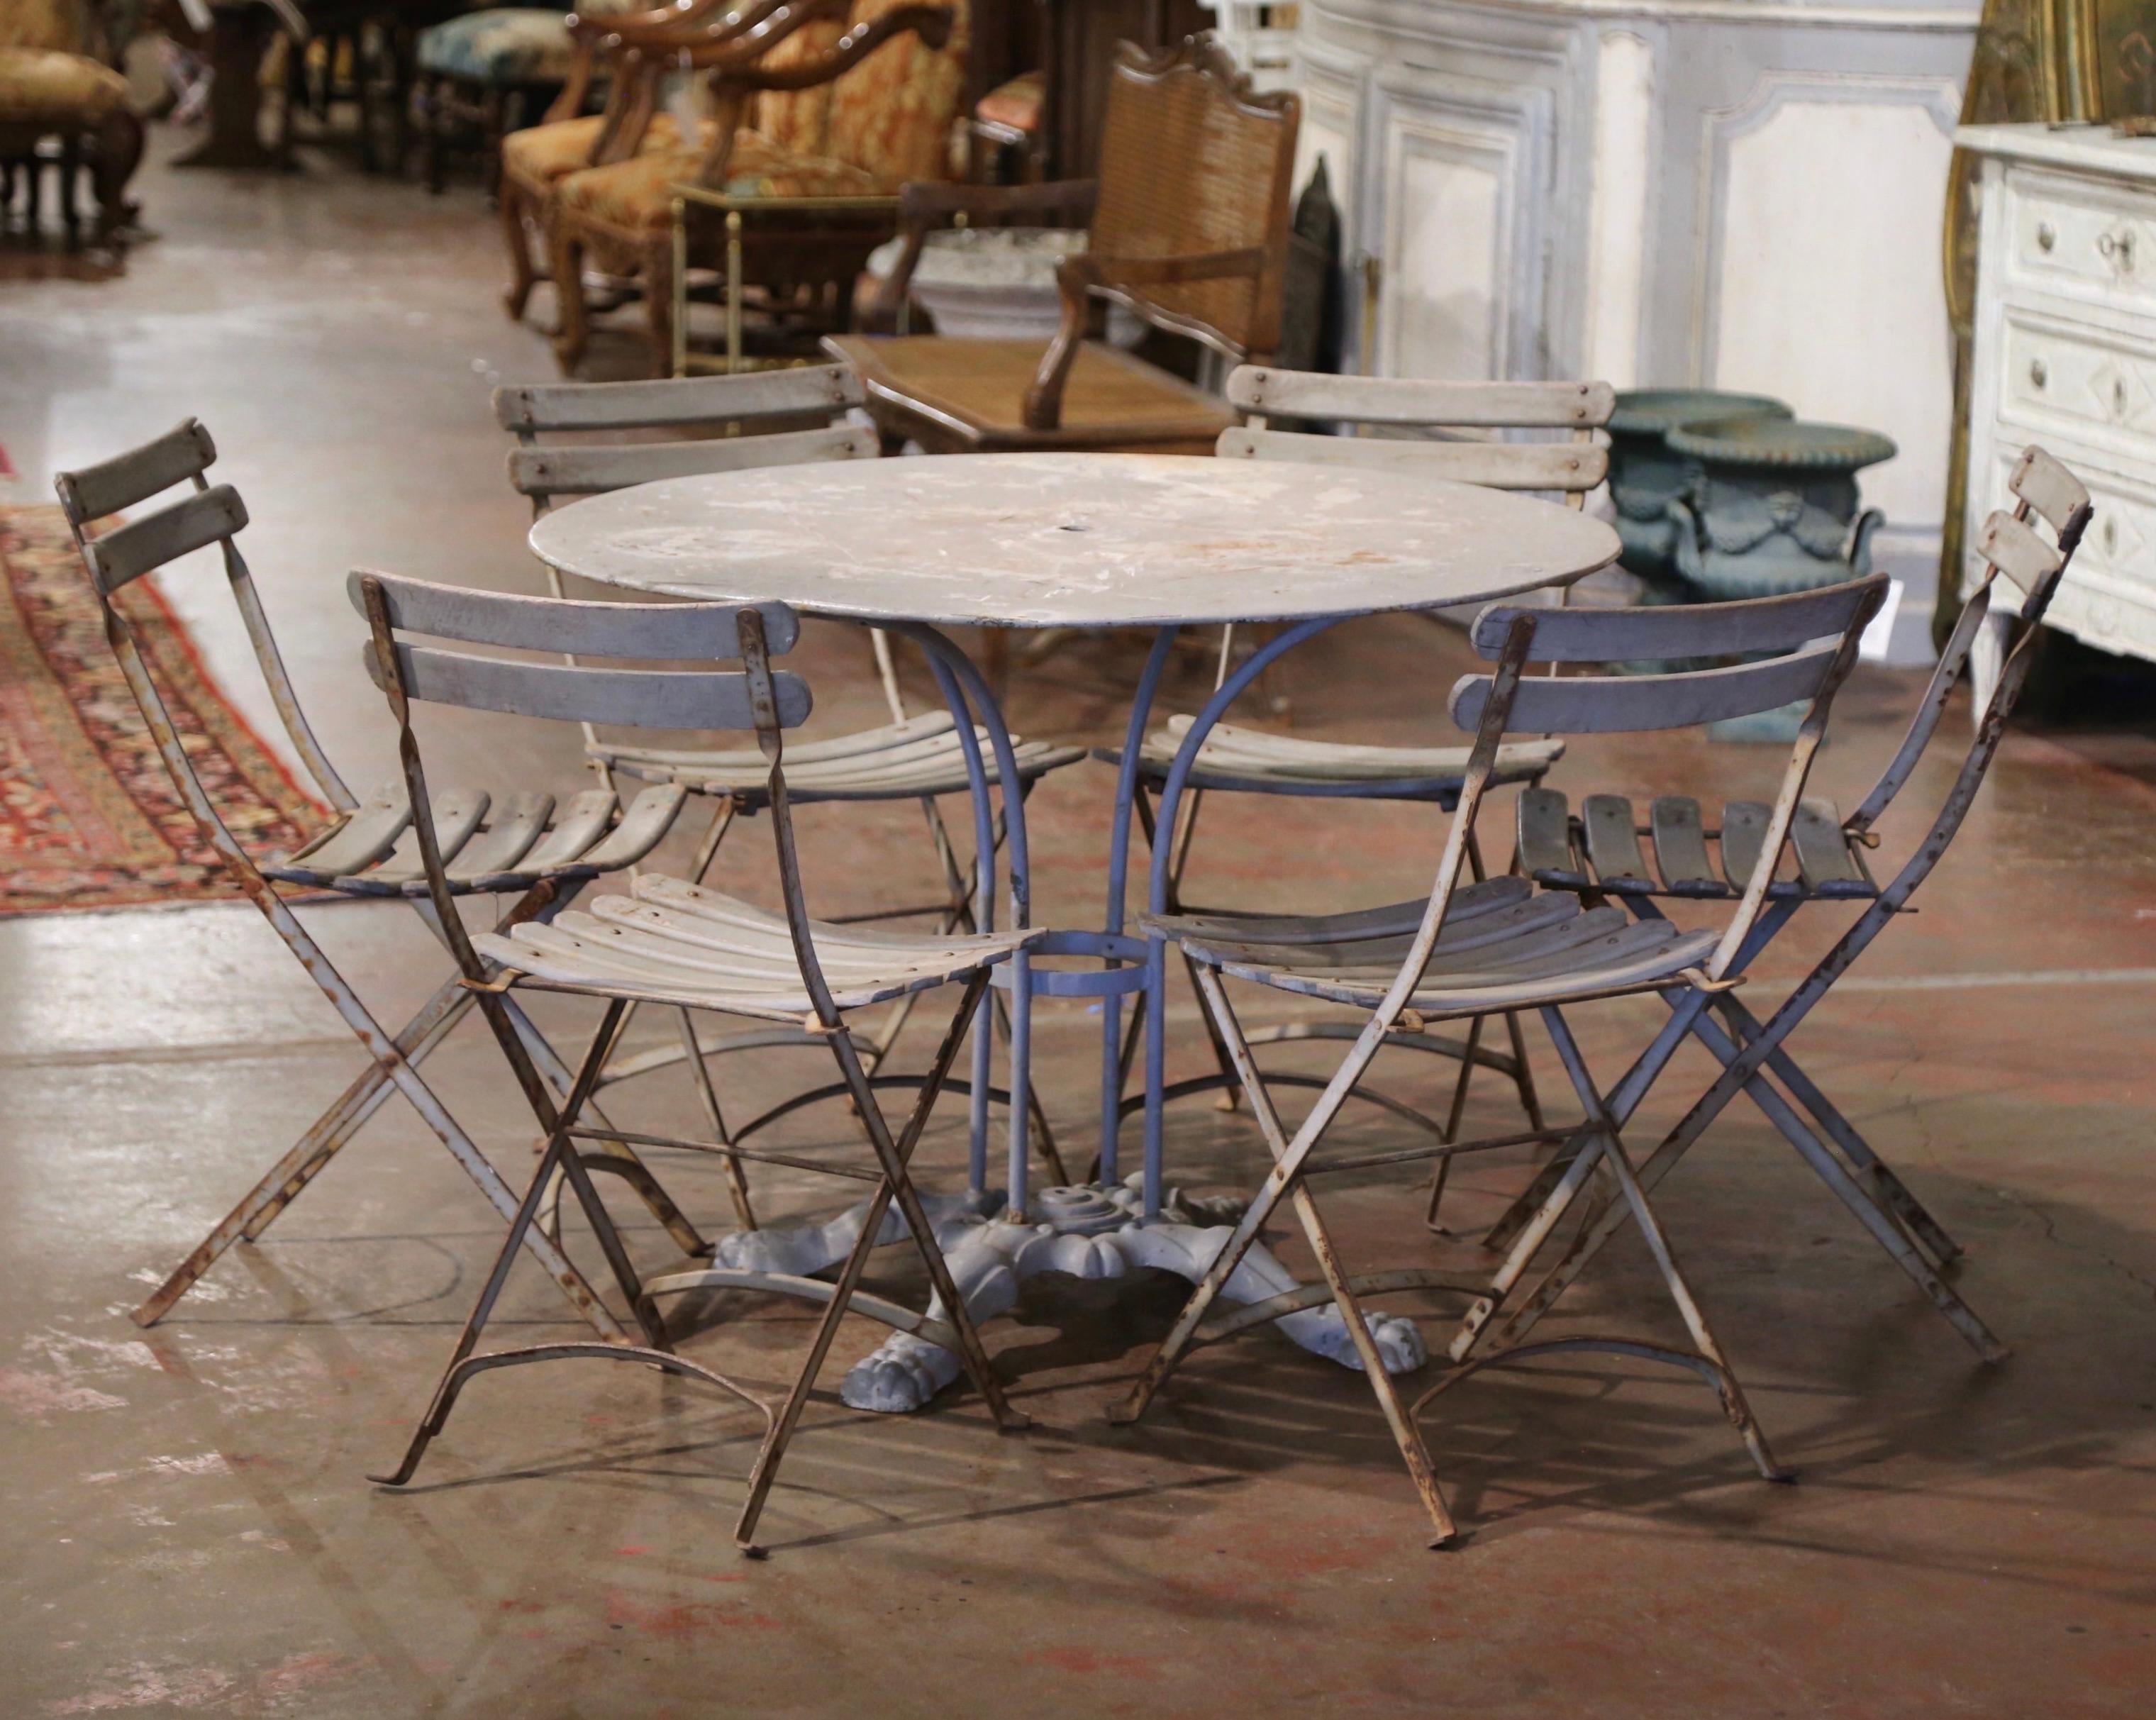 Decorate a patio, a pool area, or sun room with this elegant antique four-leg gueridon iron table. Crafted in France circa 1920, the outdoor table stands on a central pedestal base ending with four legs and paw feet; the legs are joined together